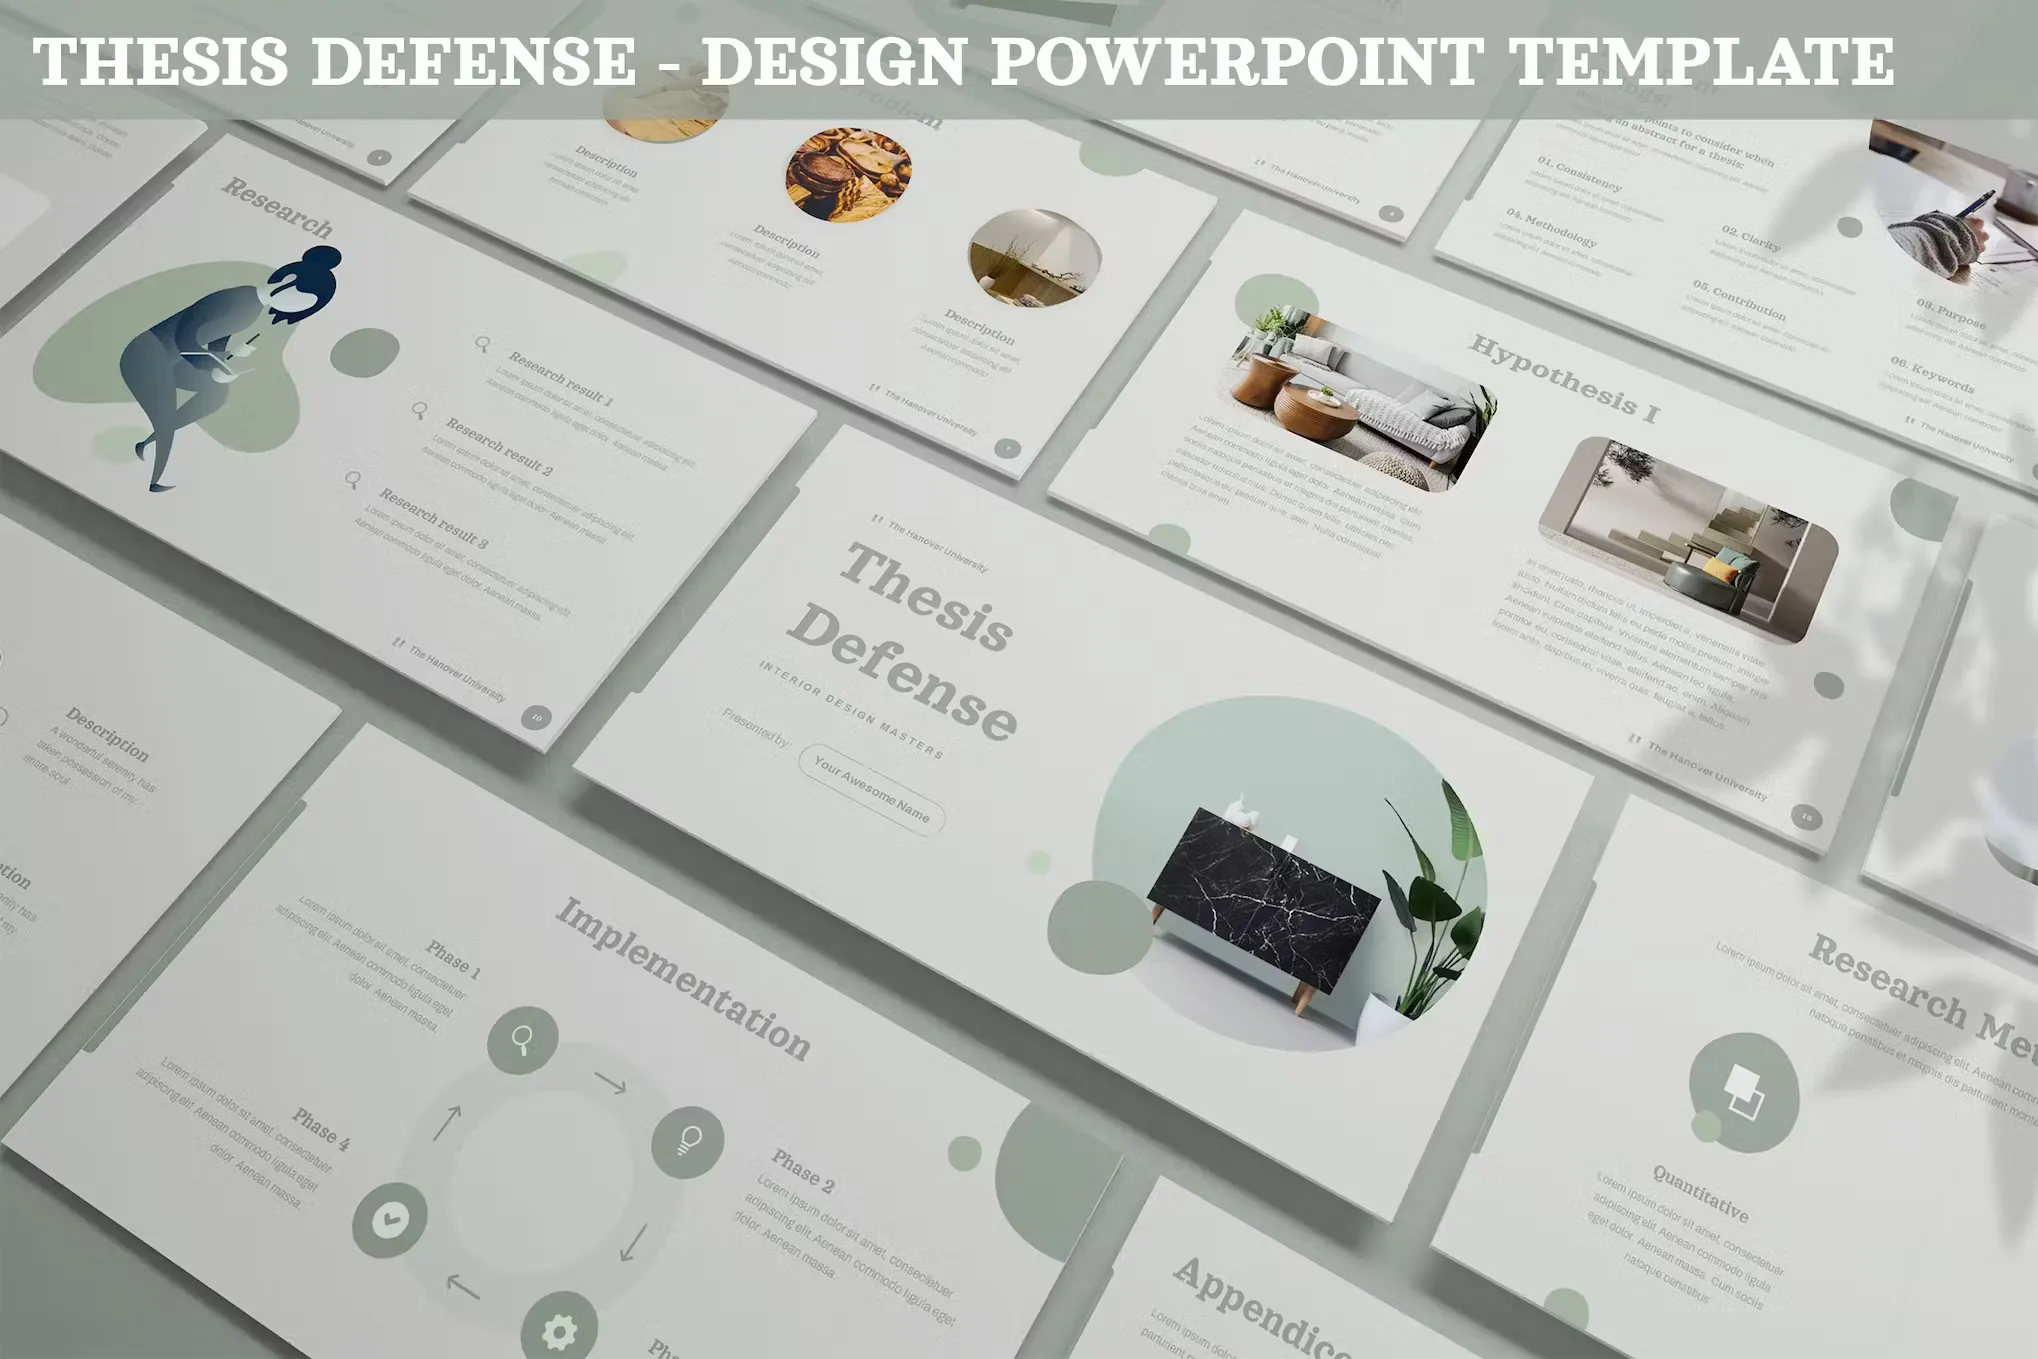 Thesis Defense - Design Powerpoint Template